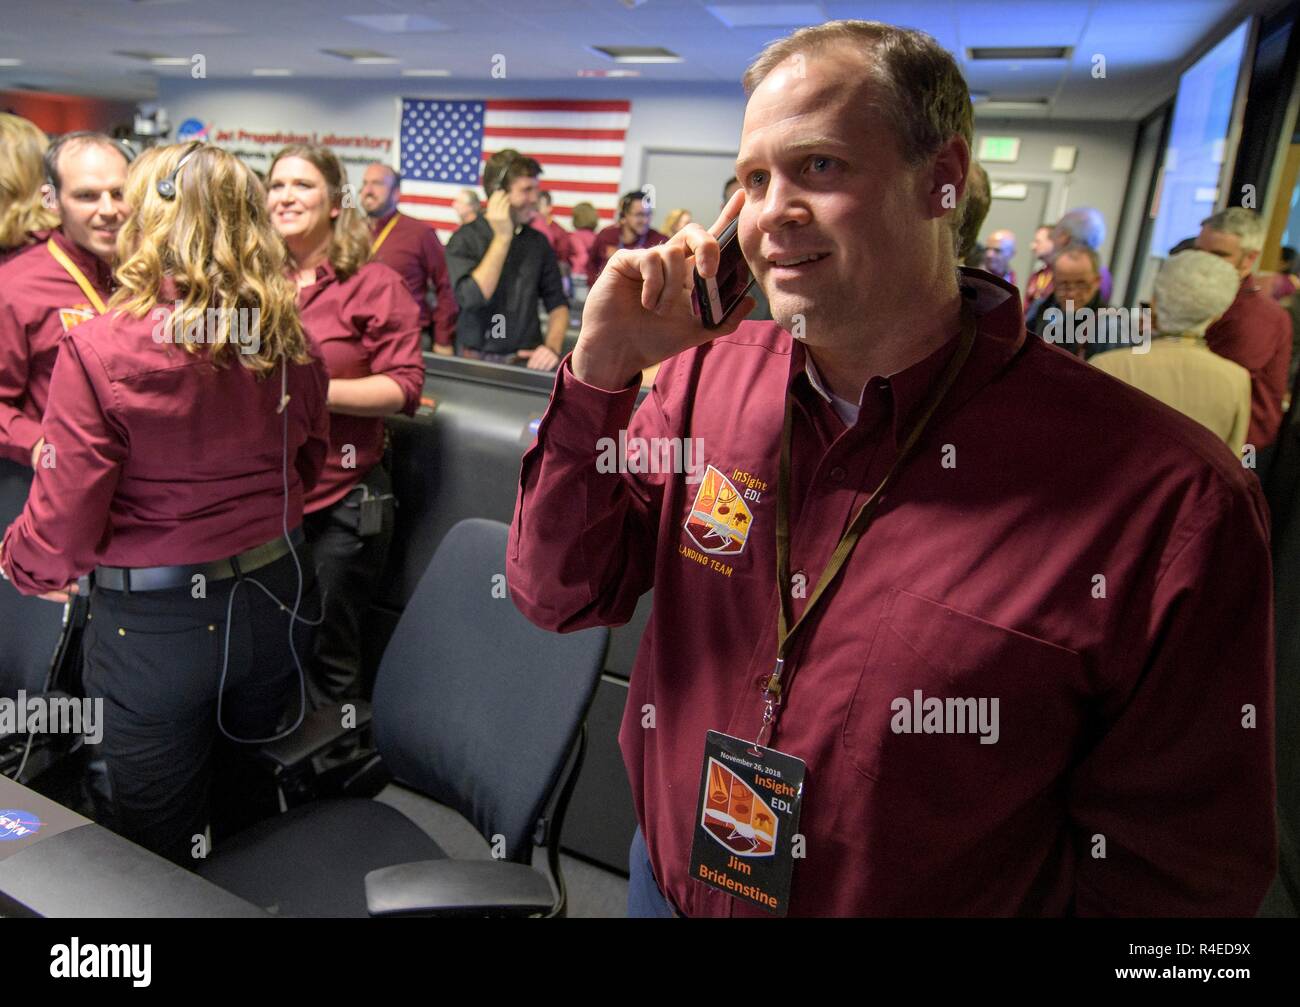 NASA Administrator Jim Bridenstine receives a congratulatory call from Vice President Mike Pence after receiving confirmation that the Mars InSight lander successfully touched down on the surface of Mars November 26, 2018 inside the Mission Support Area of the Jet Propulsion Laboratory in Pasadena, California. InSight, short for Interior Exploration using Seismic Investigations, Geodesy and Heat Transport, is a Mars lander designed to study the inner space of Mars. Stock Photo